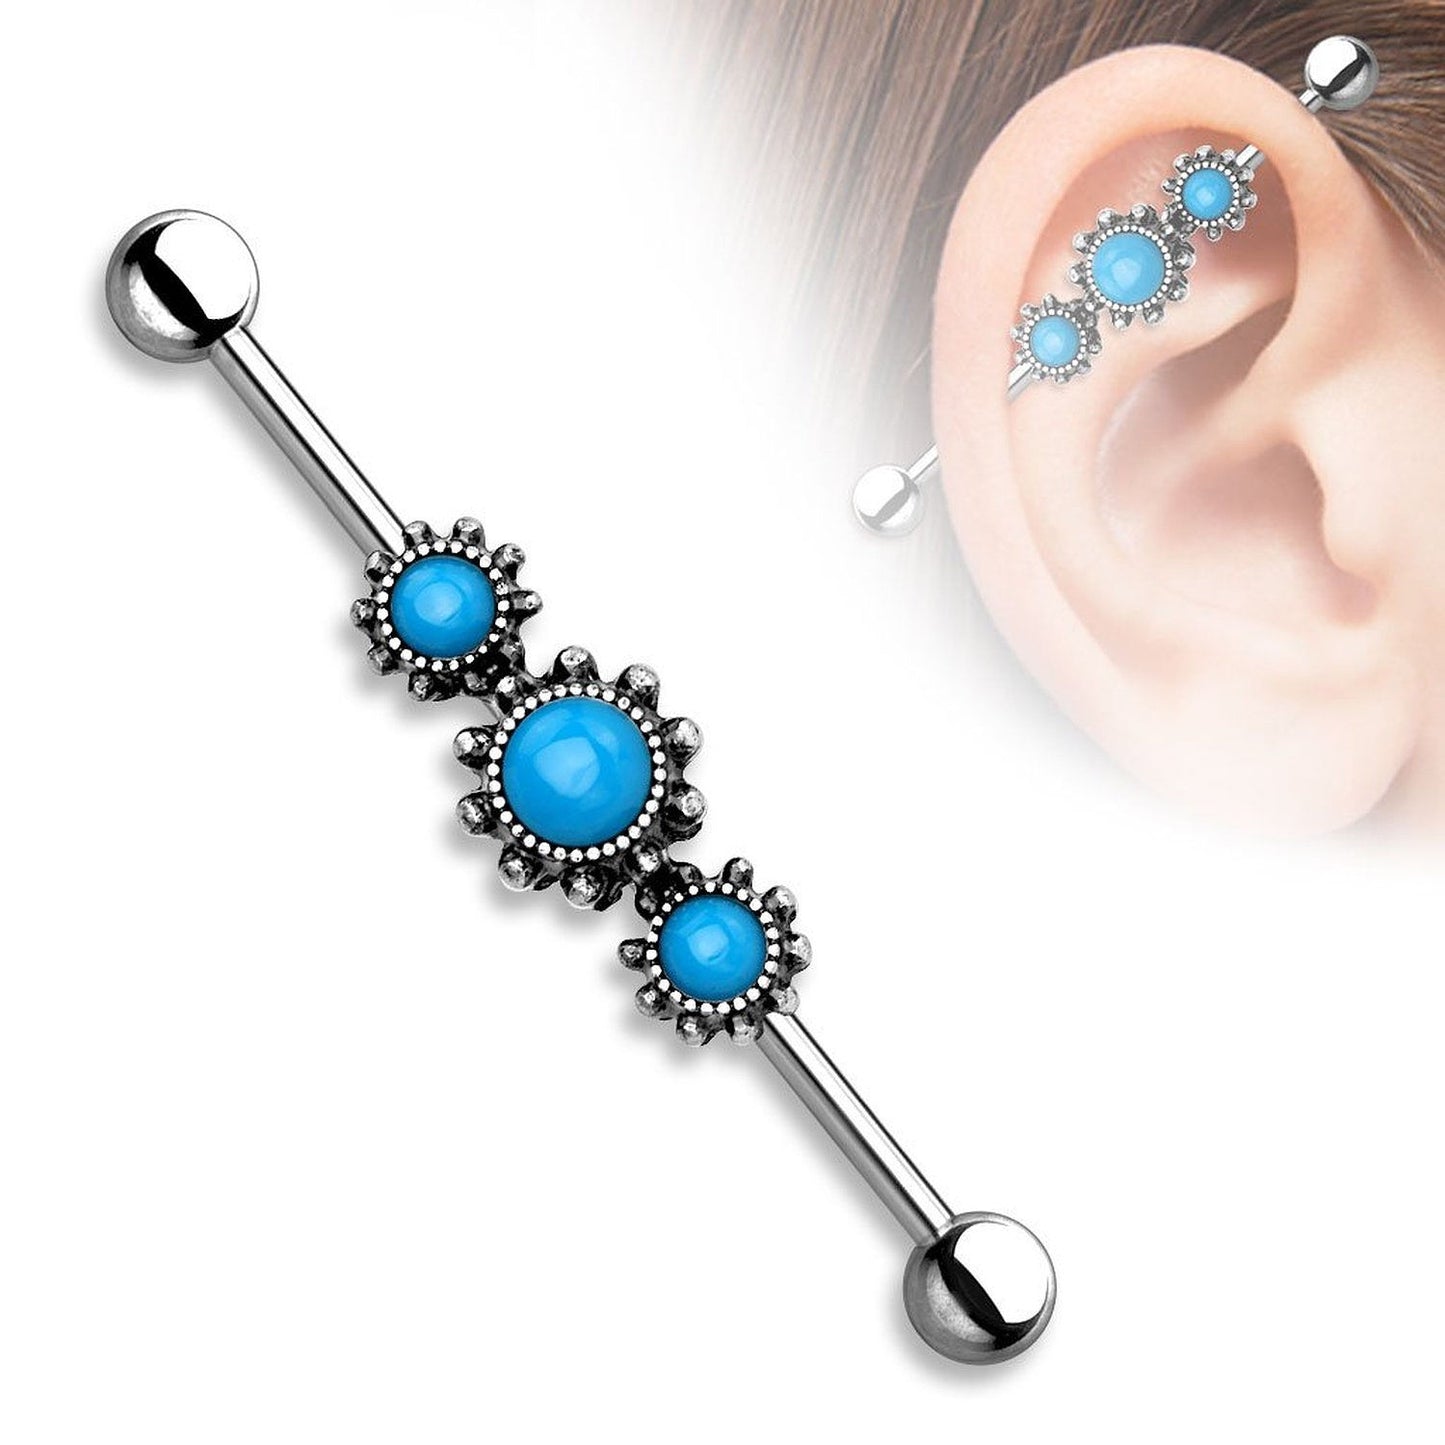 Industrial Piercing Barbells 14G with Triple Round Turquoise Centers